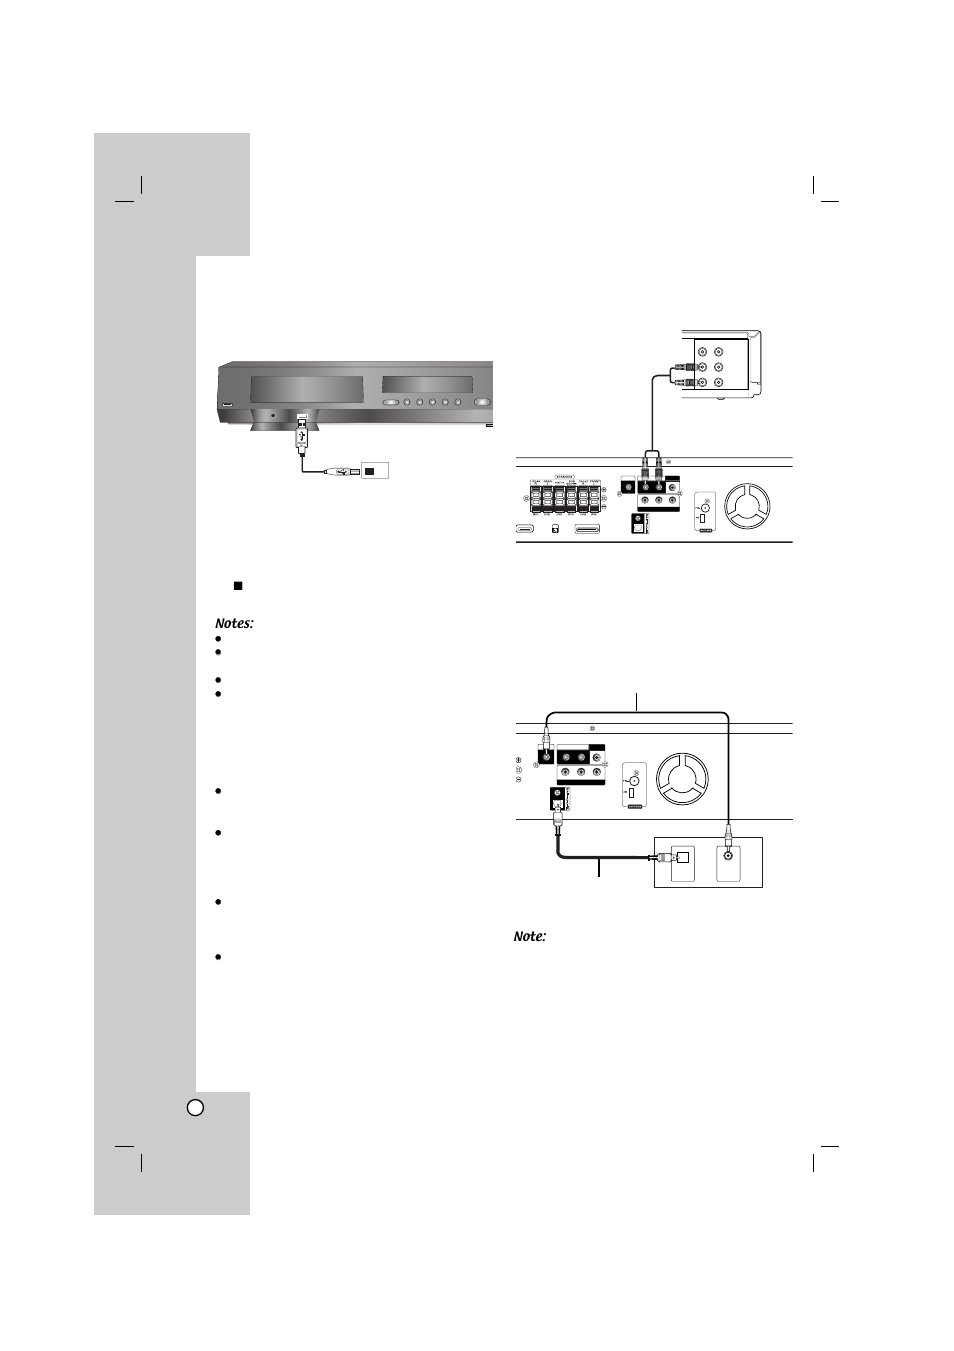 Optional equipment connection, Xm in i pod, Usb connection | Aux in connection, Optical in connection (o), Coaxial in connection (c), Set top box (or digital device, etc) o c | LG LHT764 User Manual | Page 12 / 41